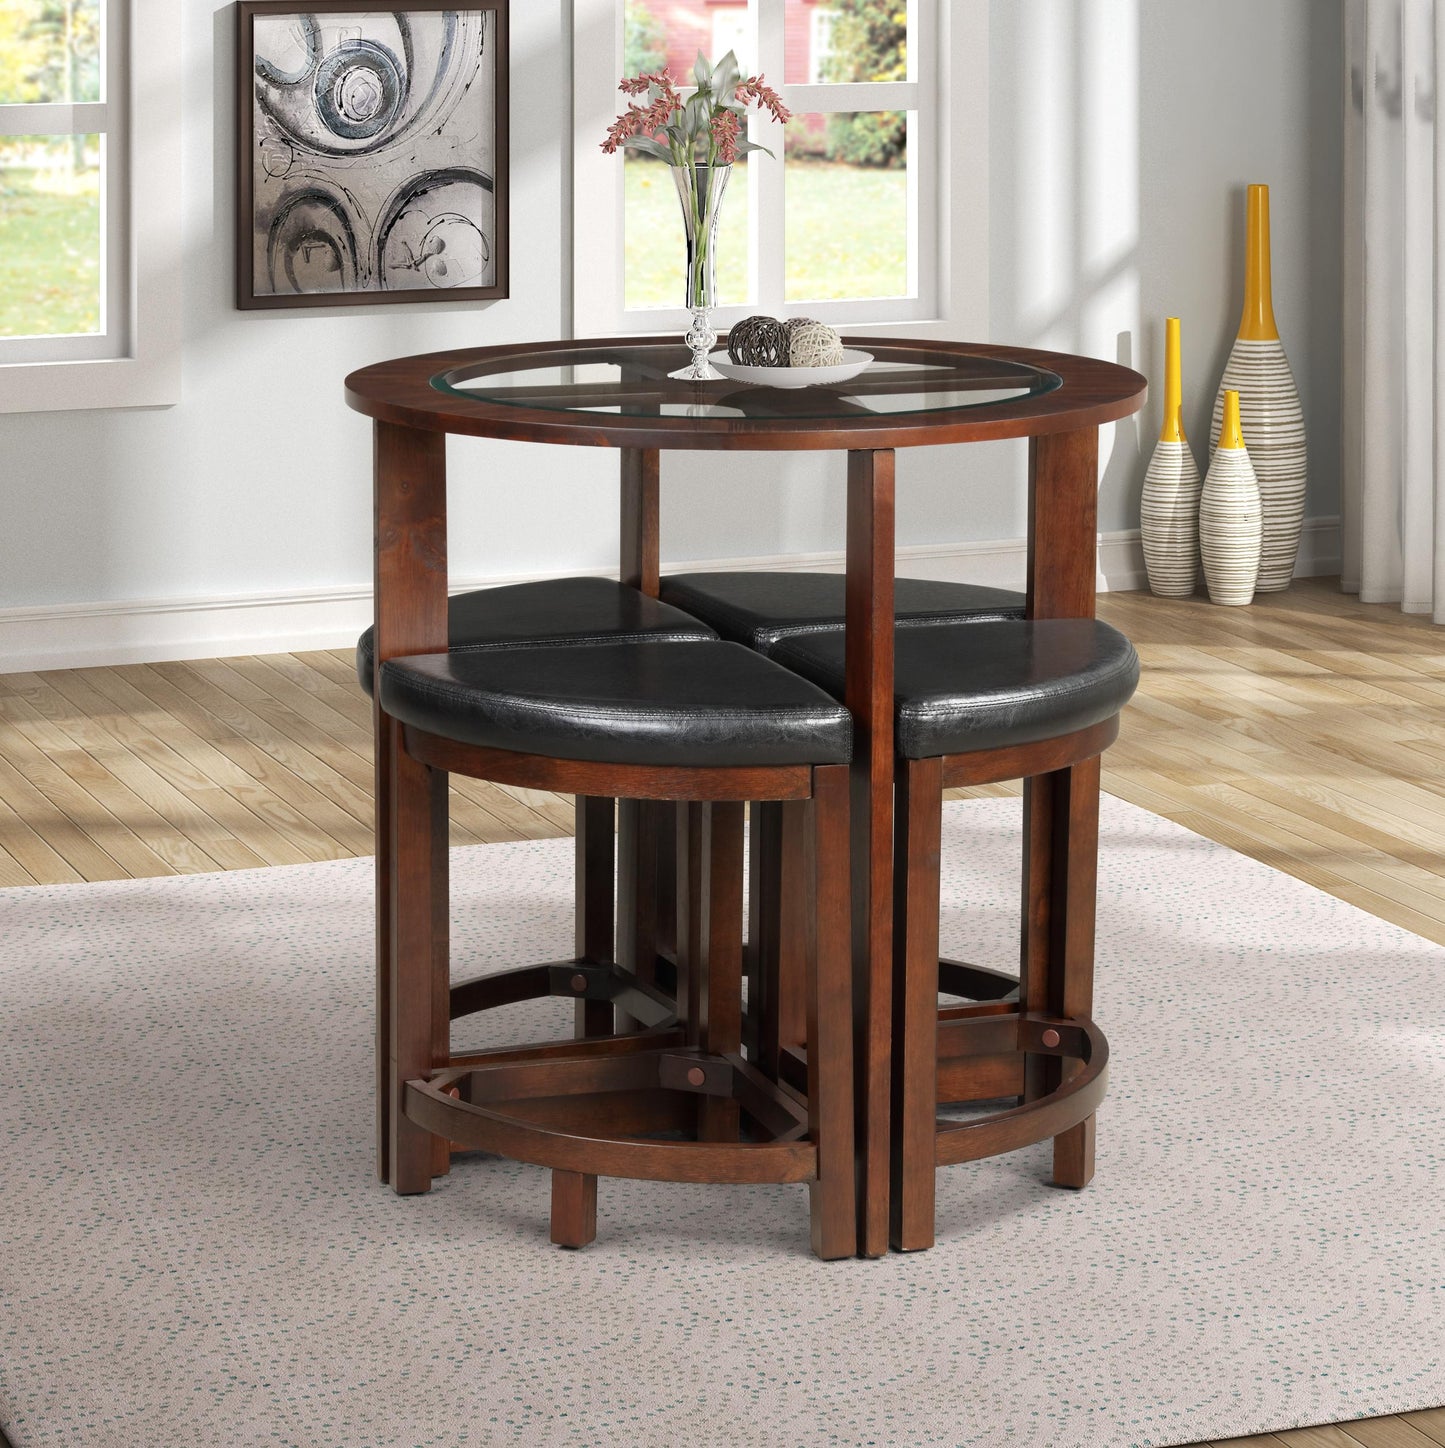 Solid Wood Glass Top Counter Height Table w/ 4 Stools